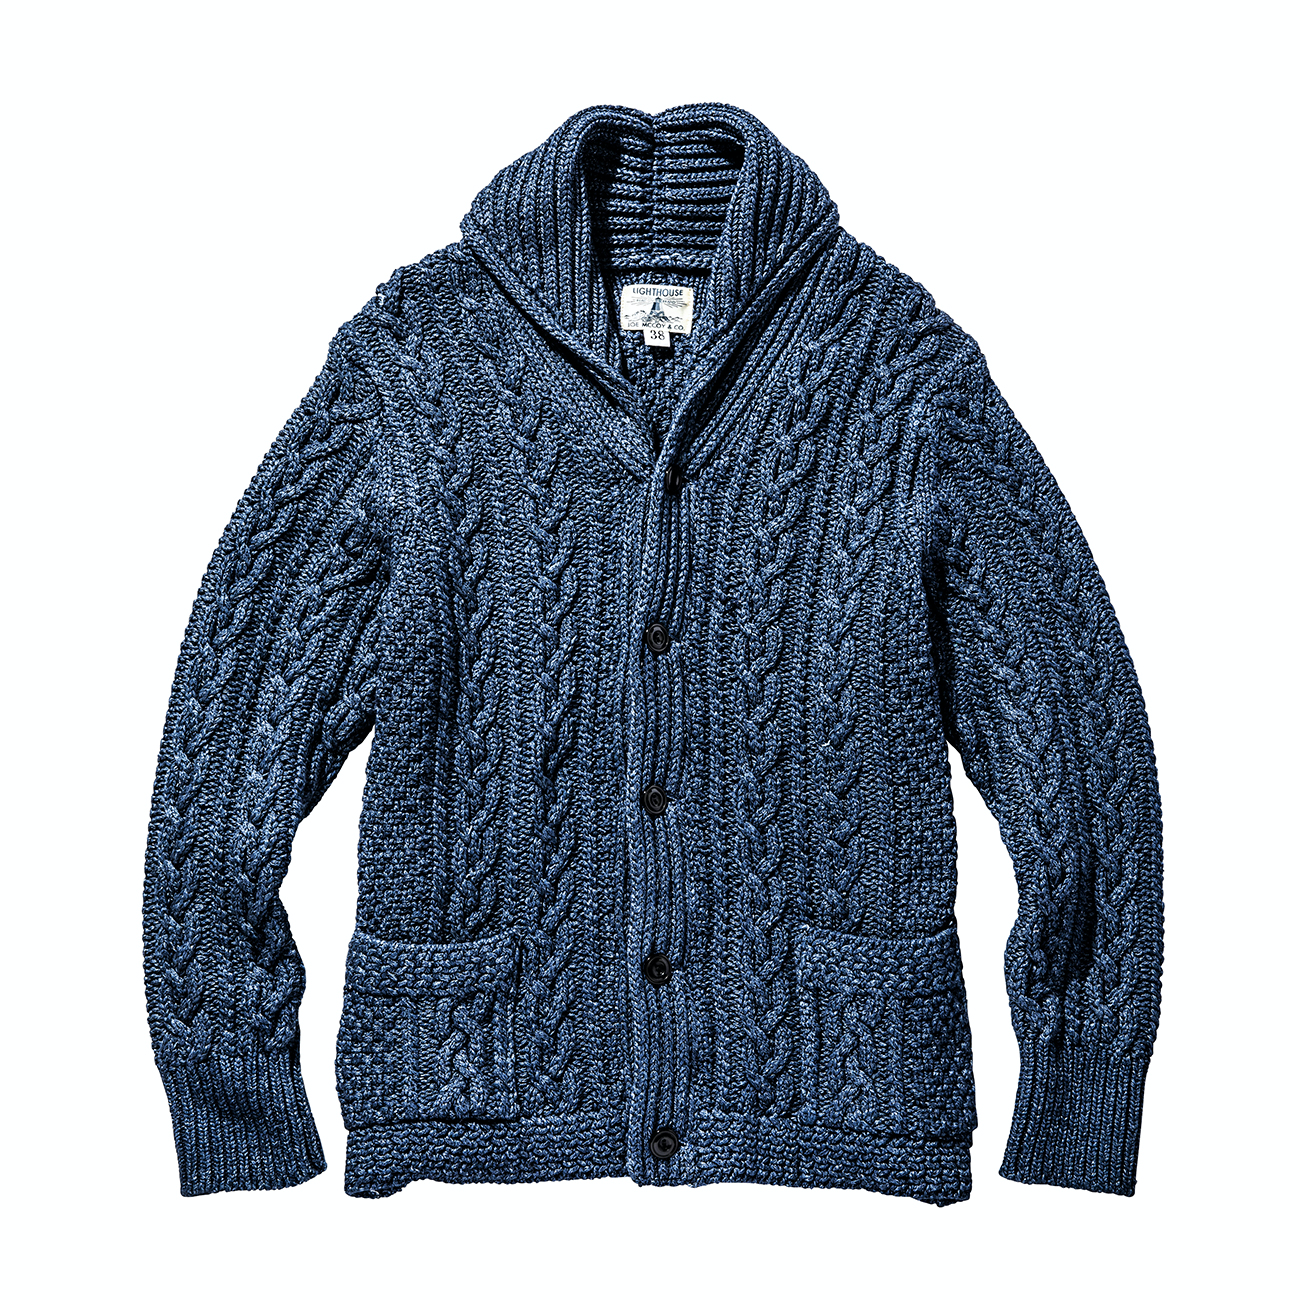 YOUTHUP Mens Knitted Cardigan Fleece Lined Sweater Thick Jumper Warm Winter Jacket 